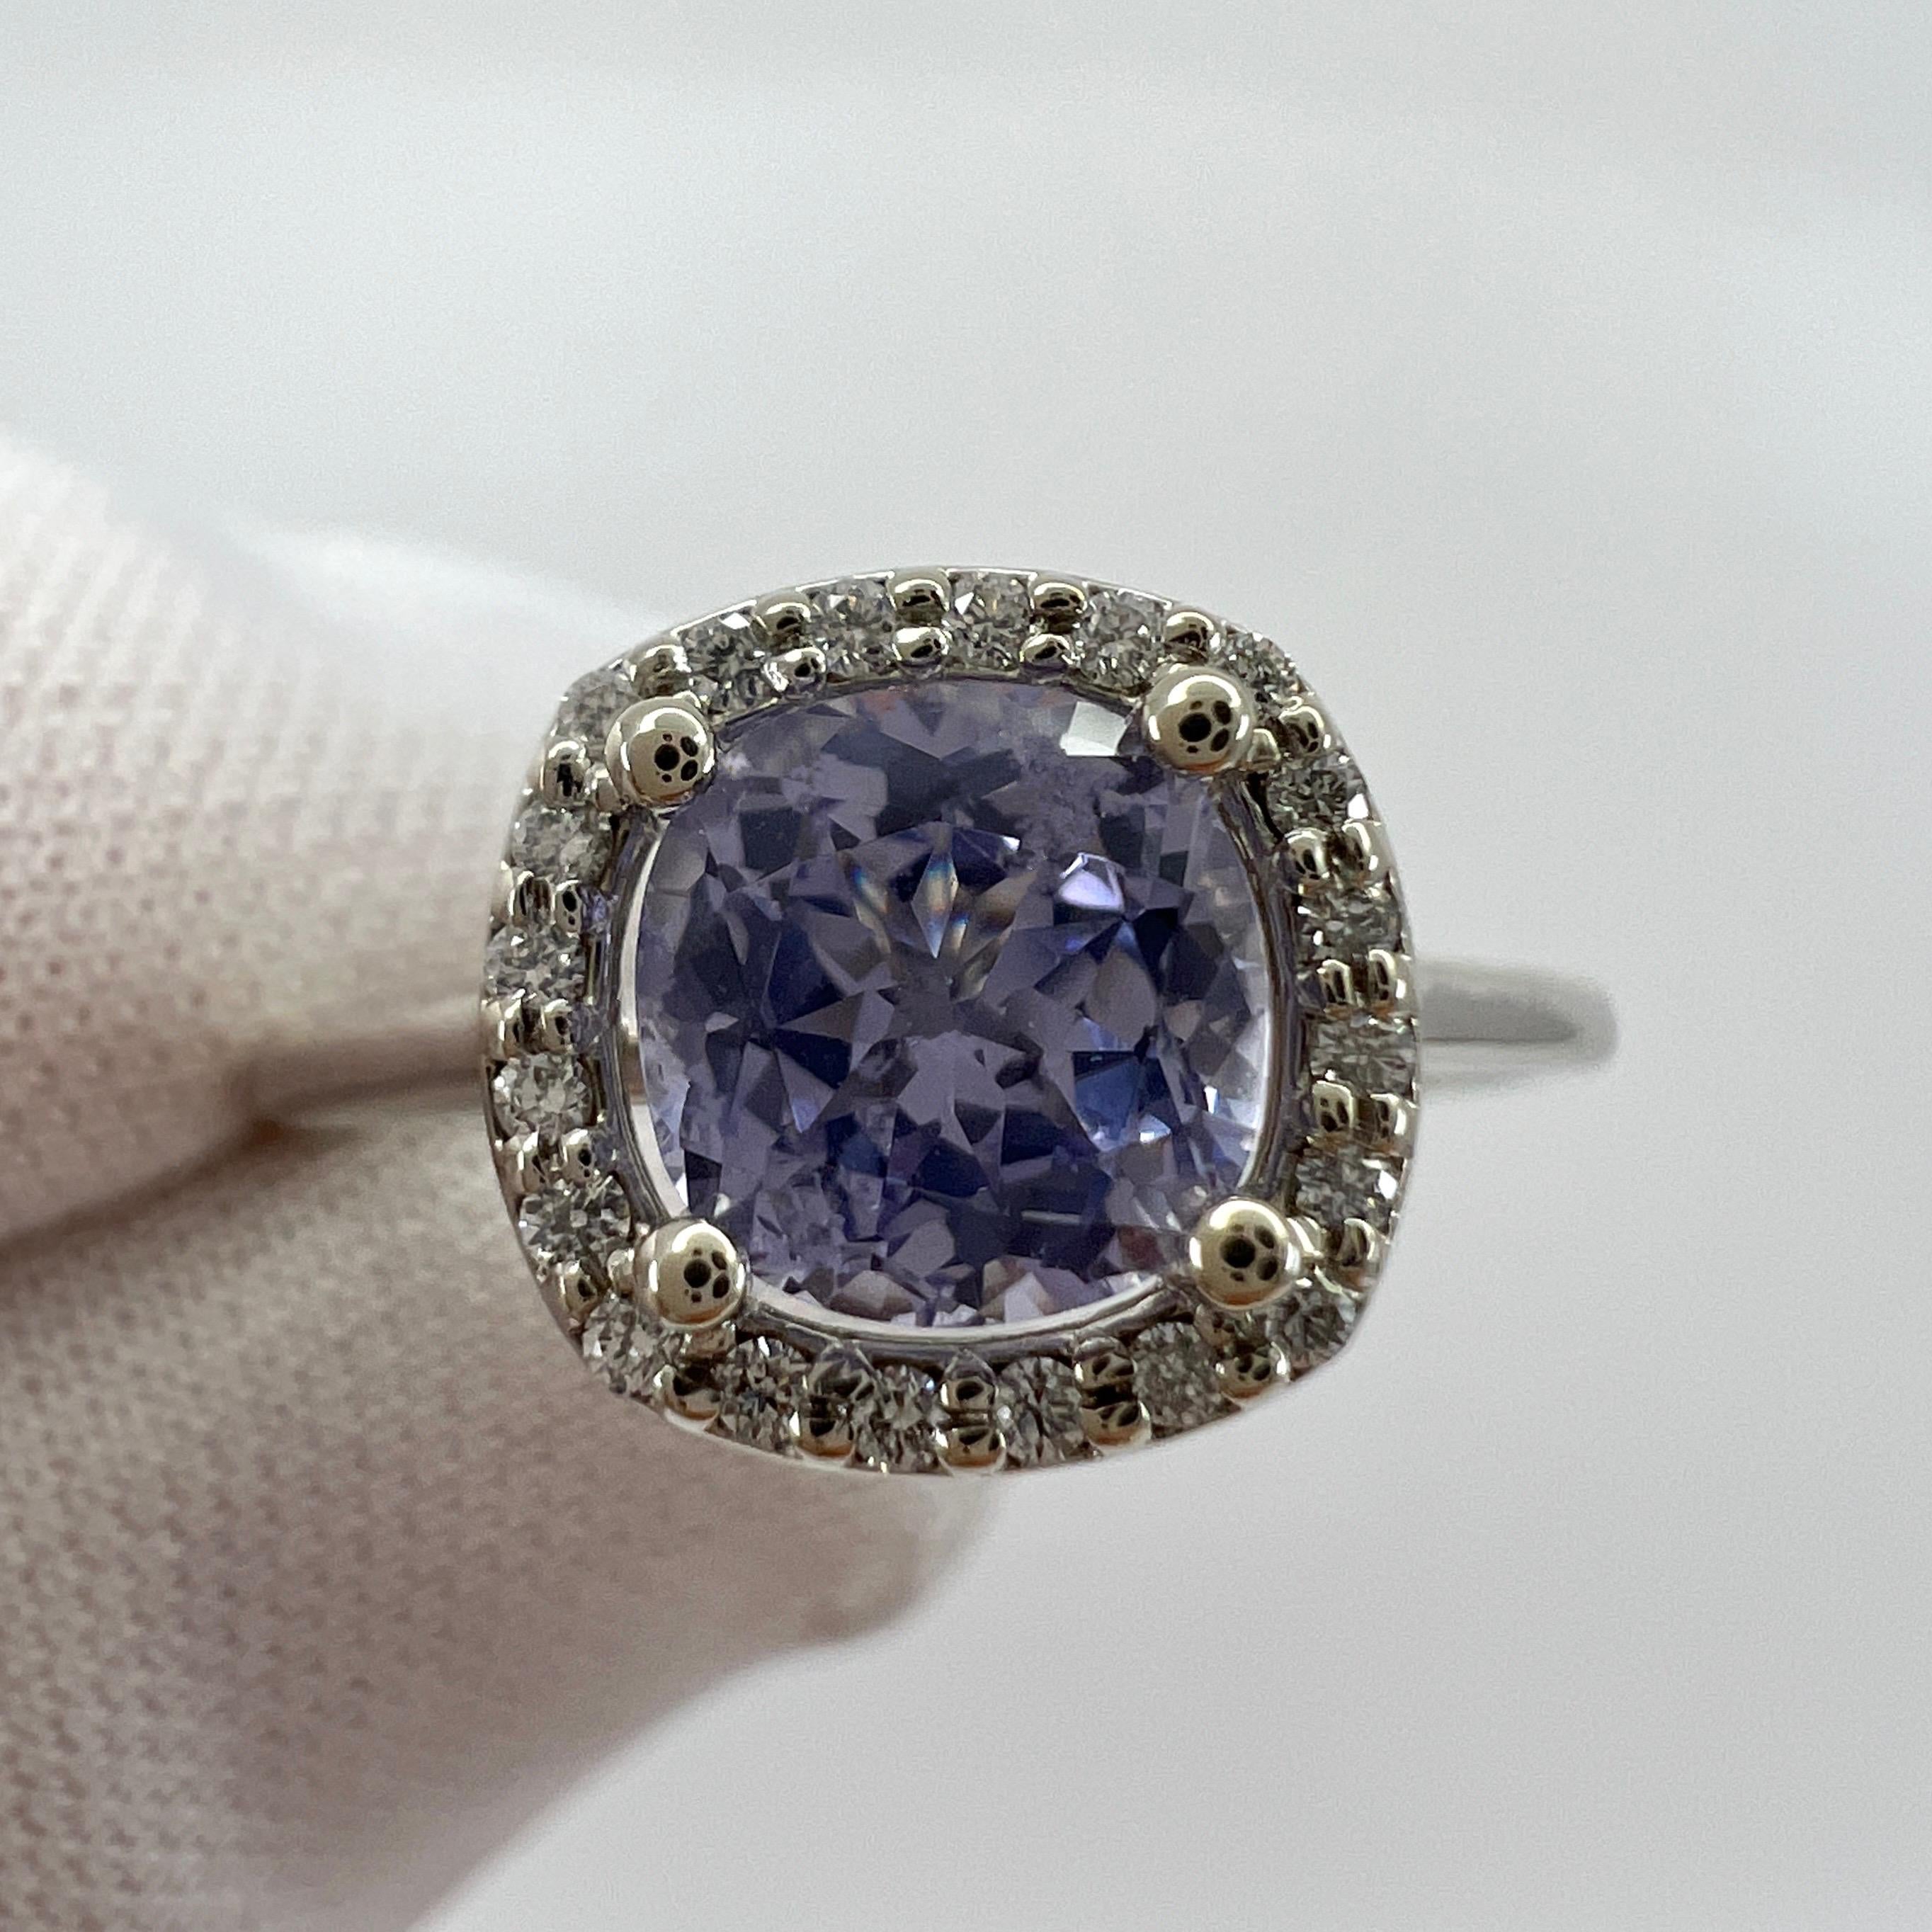 Cushion Cut Vivid Lilac Purple Spinel And Diamond 18k White Gold Halo Ring.

1.02 Carat natural spinel with a unique vivid purple lilac colour and very good clarity. Clean stone with only some small natural inclusions visible when looking